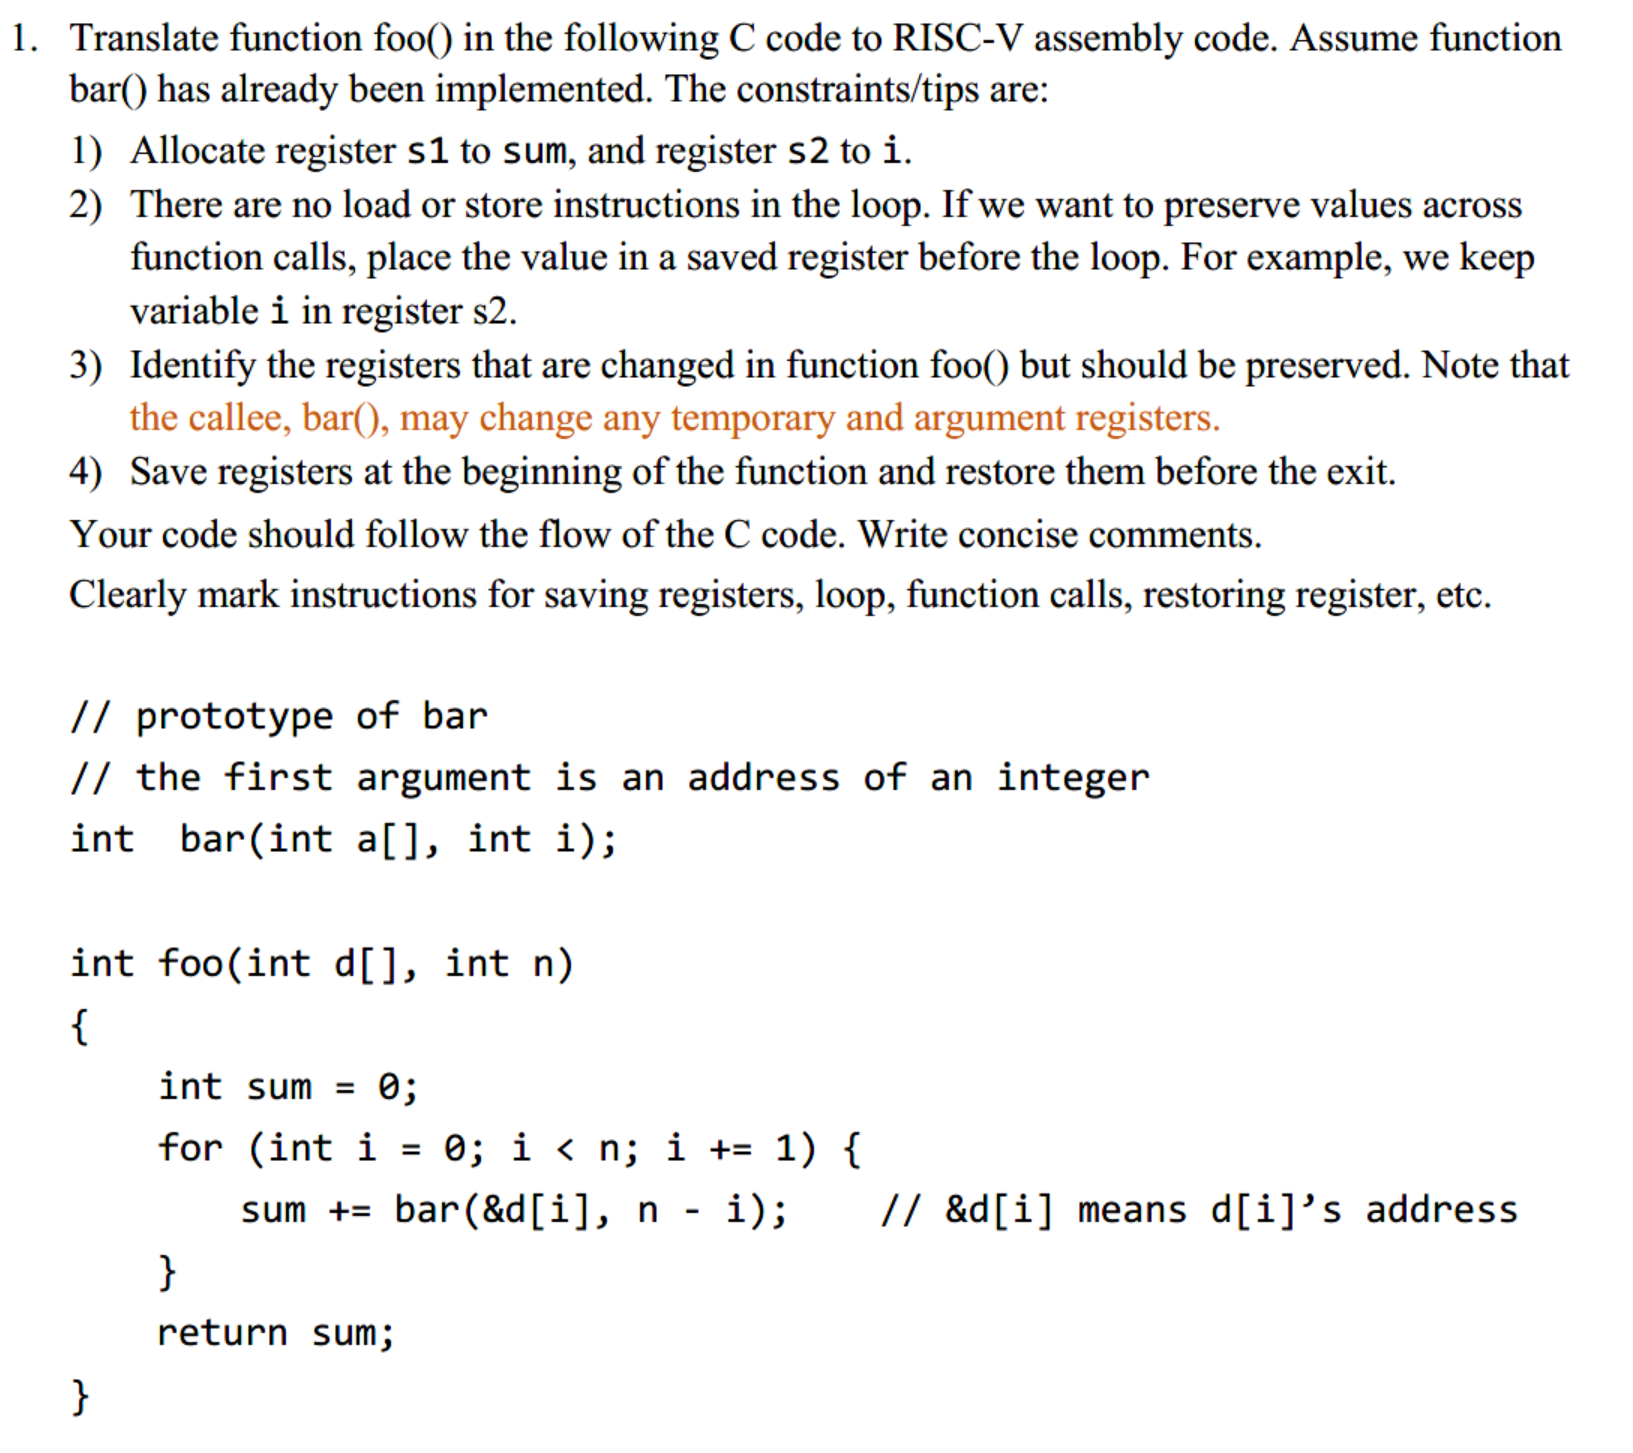 1. Translate function foo() in the following C code to RISC-V assembly code. Assume function bar() has